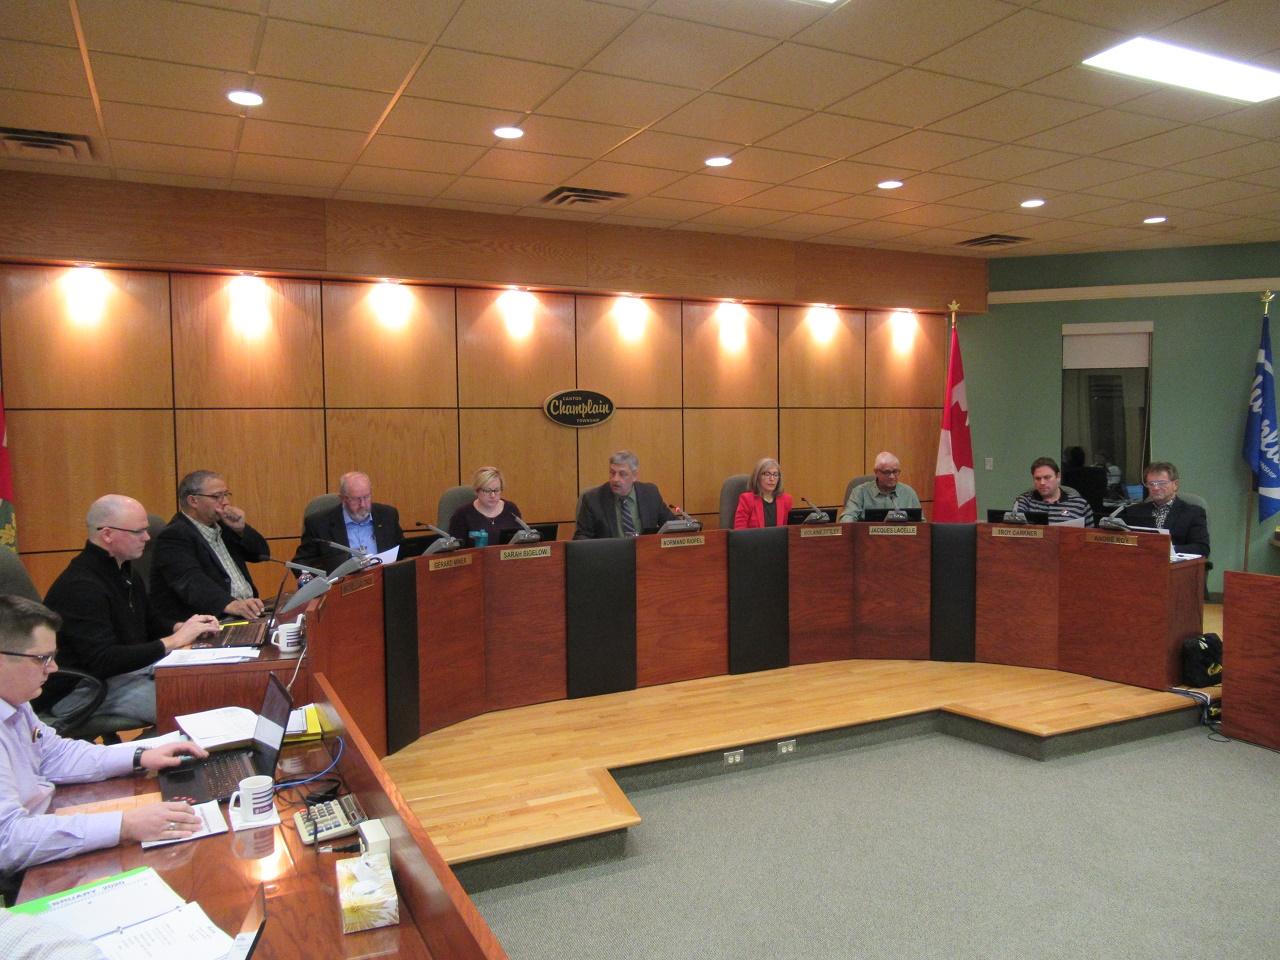 Champlain Township will collect 6.03 per cent more taxes in 2020